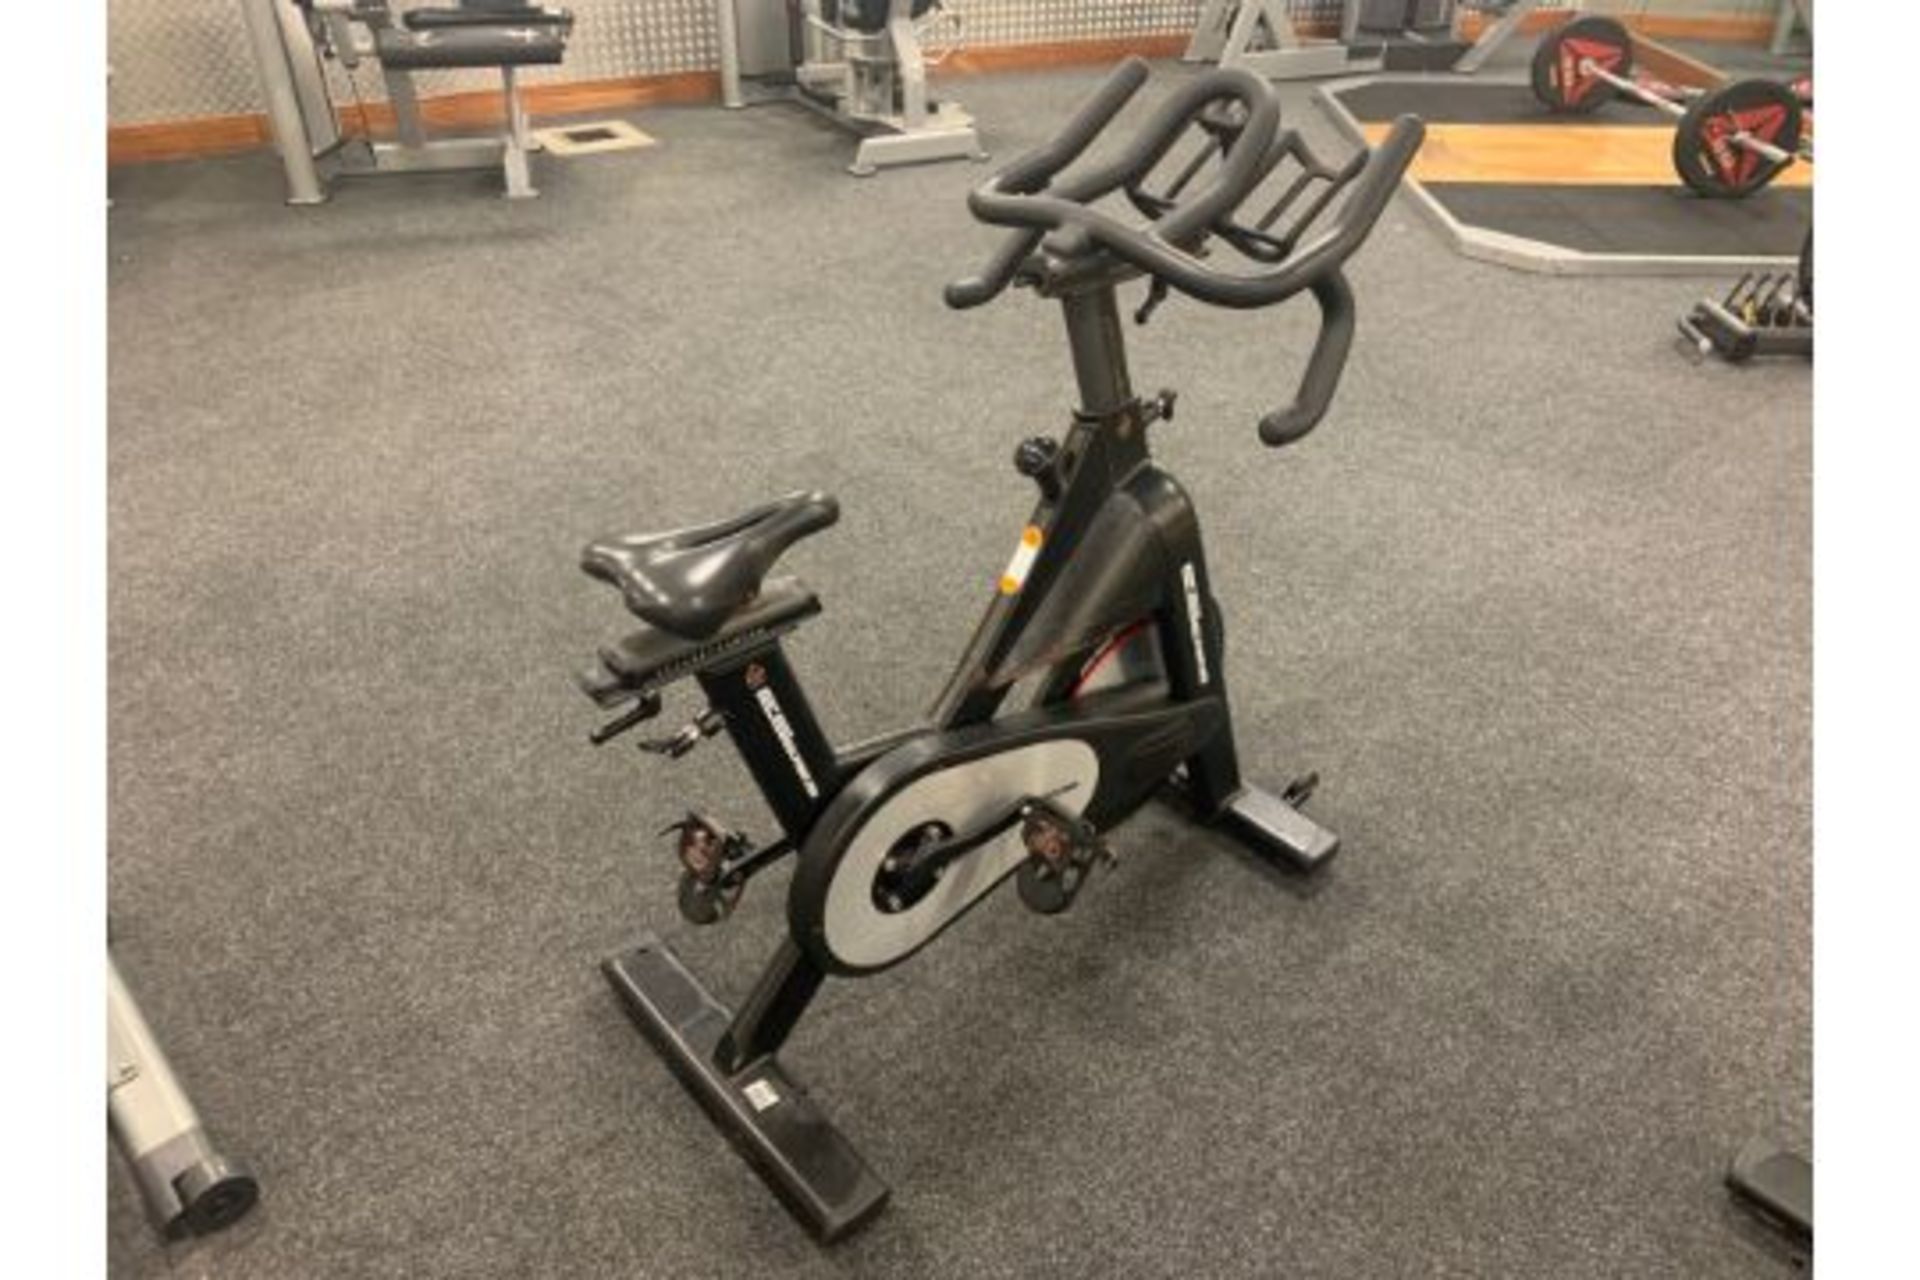 F Series Spin Bike - Image 3 of 3